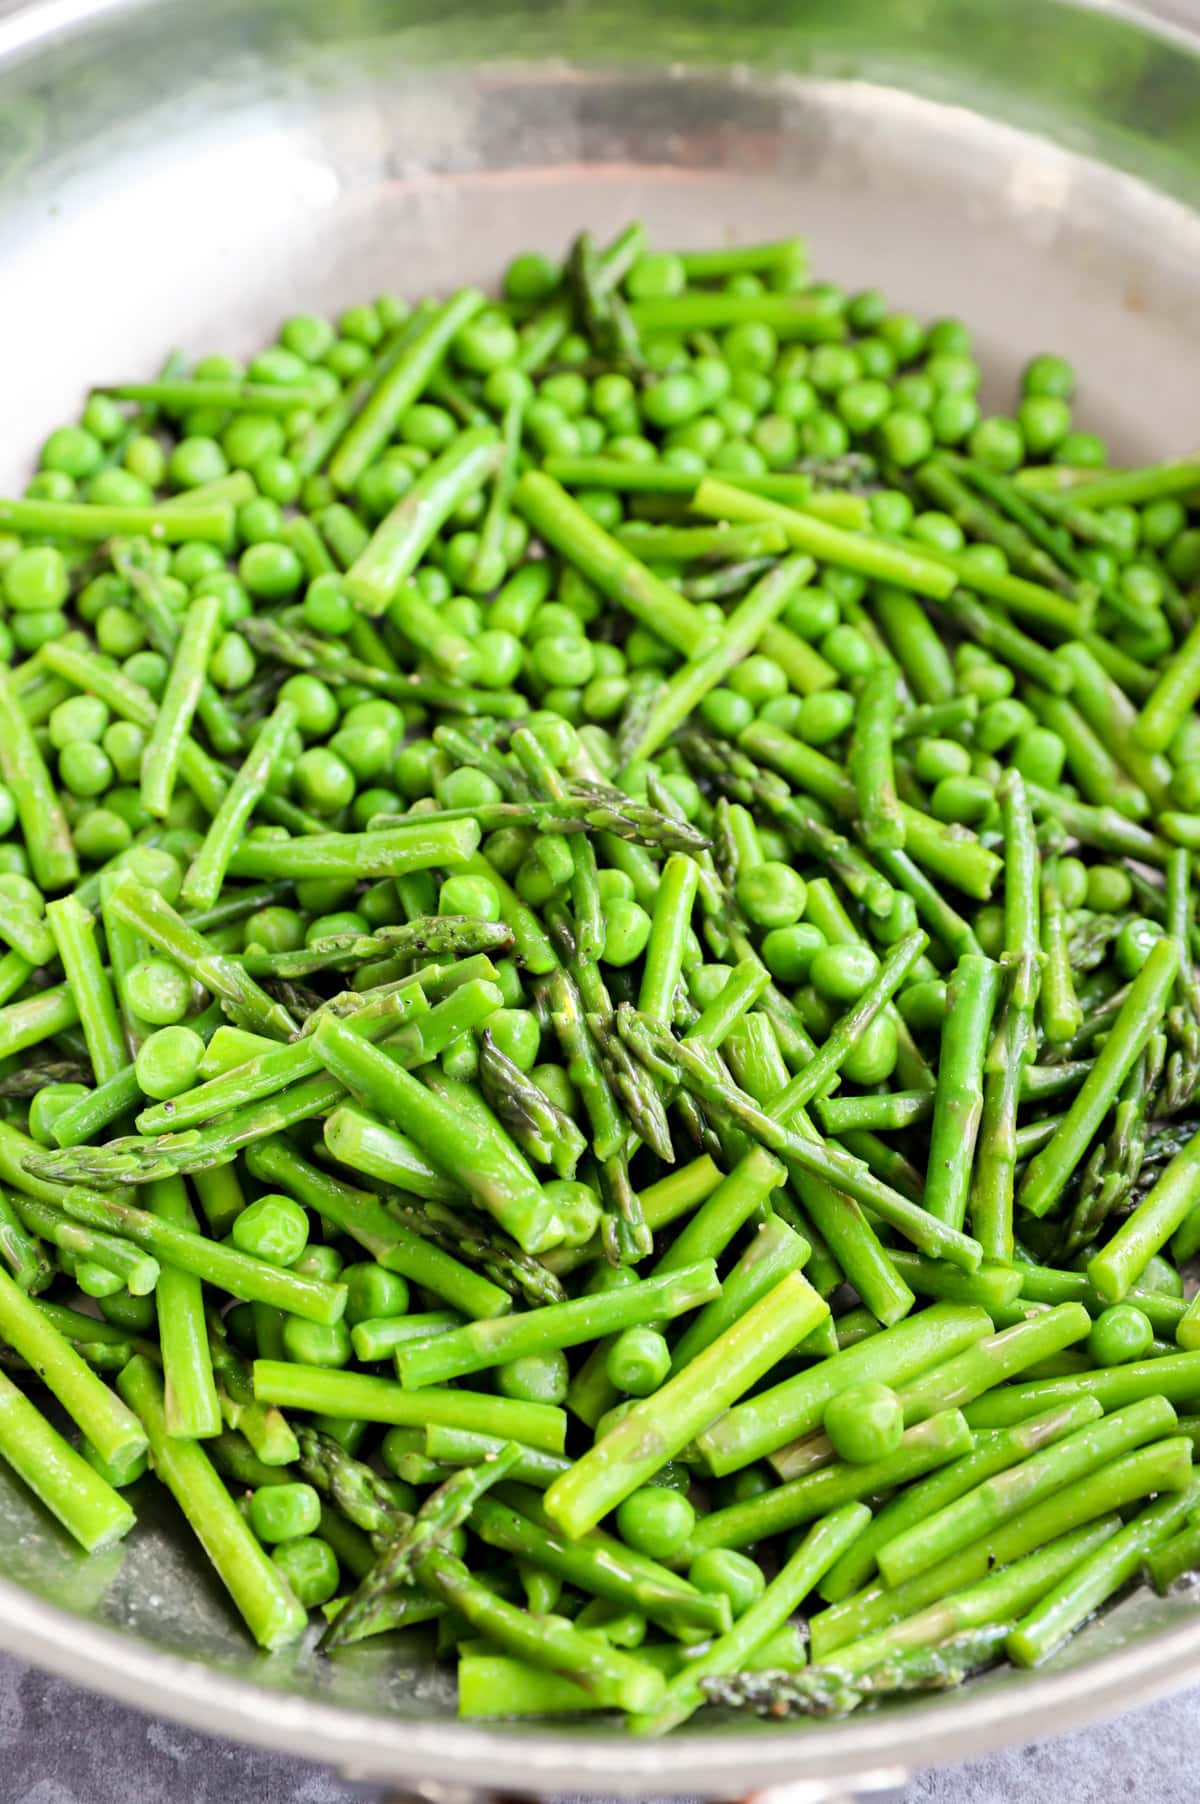 Peas and asparagus cooking in a skillet